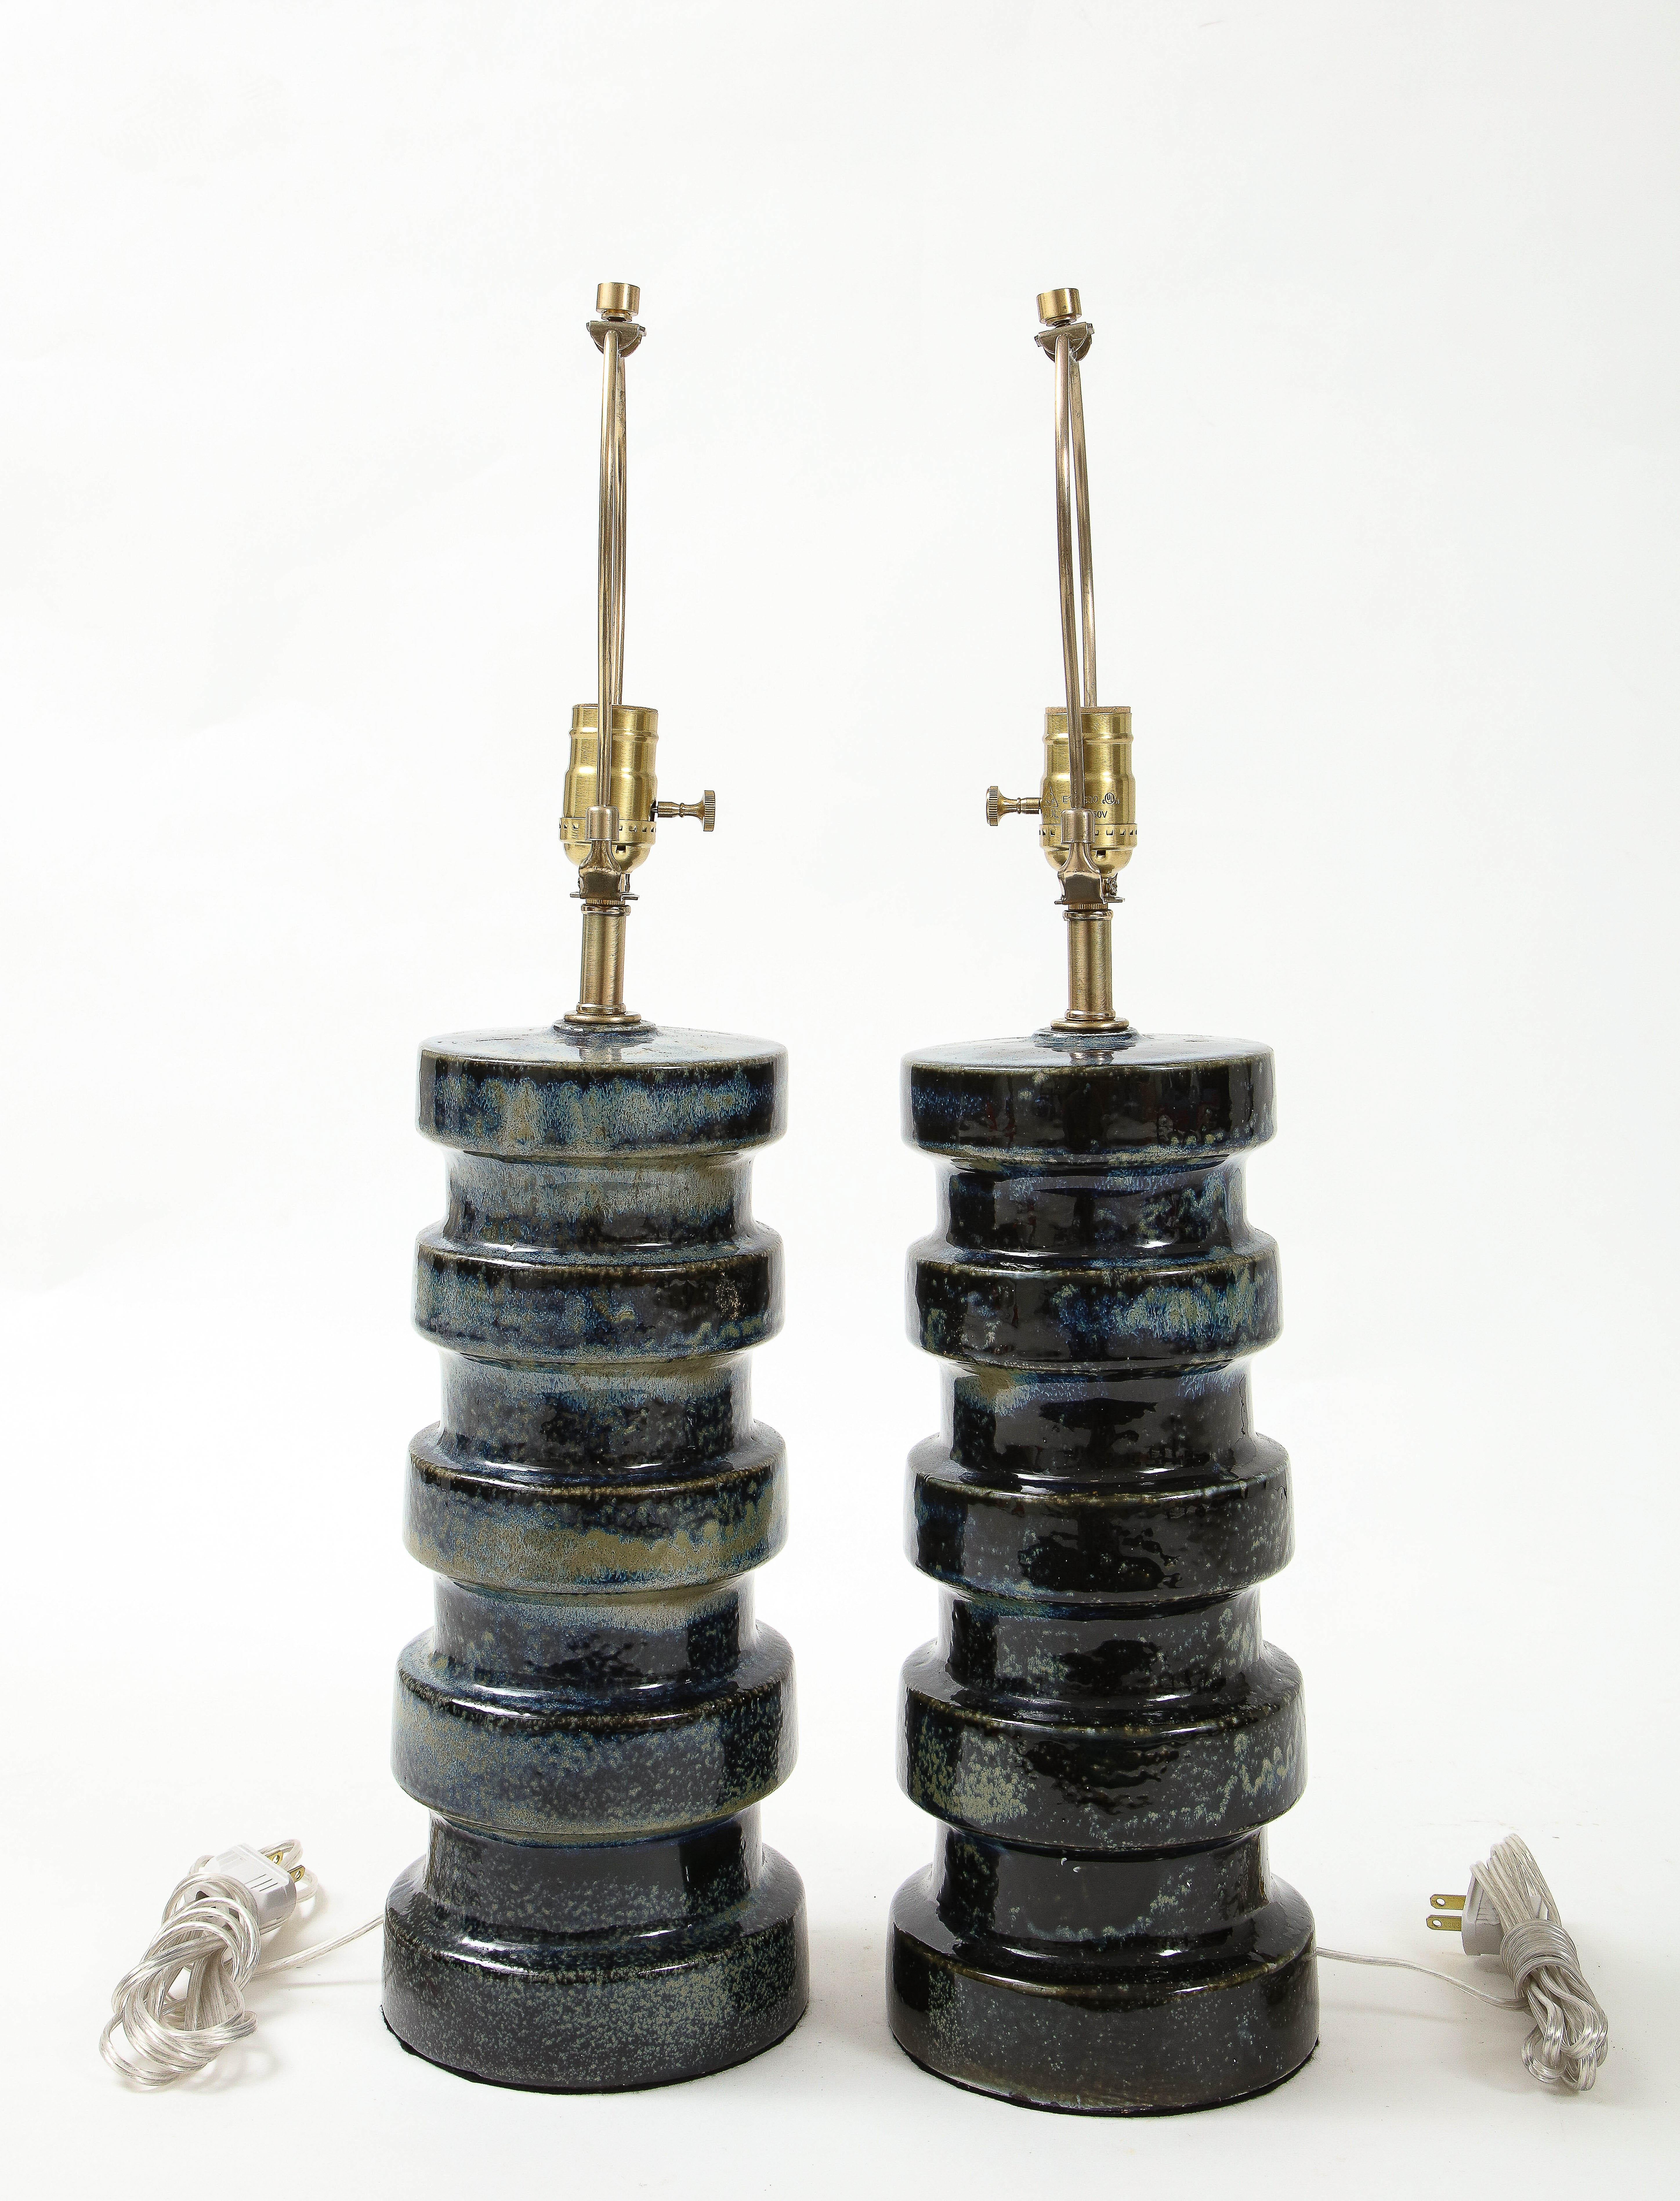 Pair of West German pottery lamps featuring striated colors of dark blue and tan colors. Lamps have been rewired to US standards using brass hardware, 100W max bulbs.